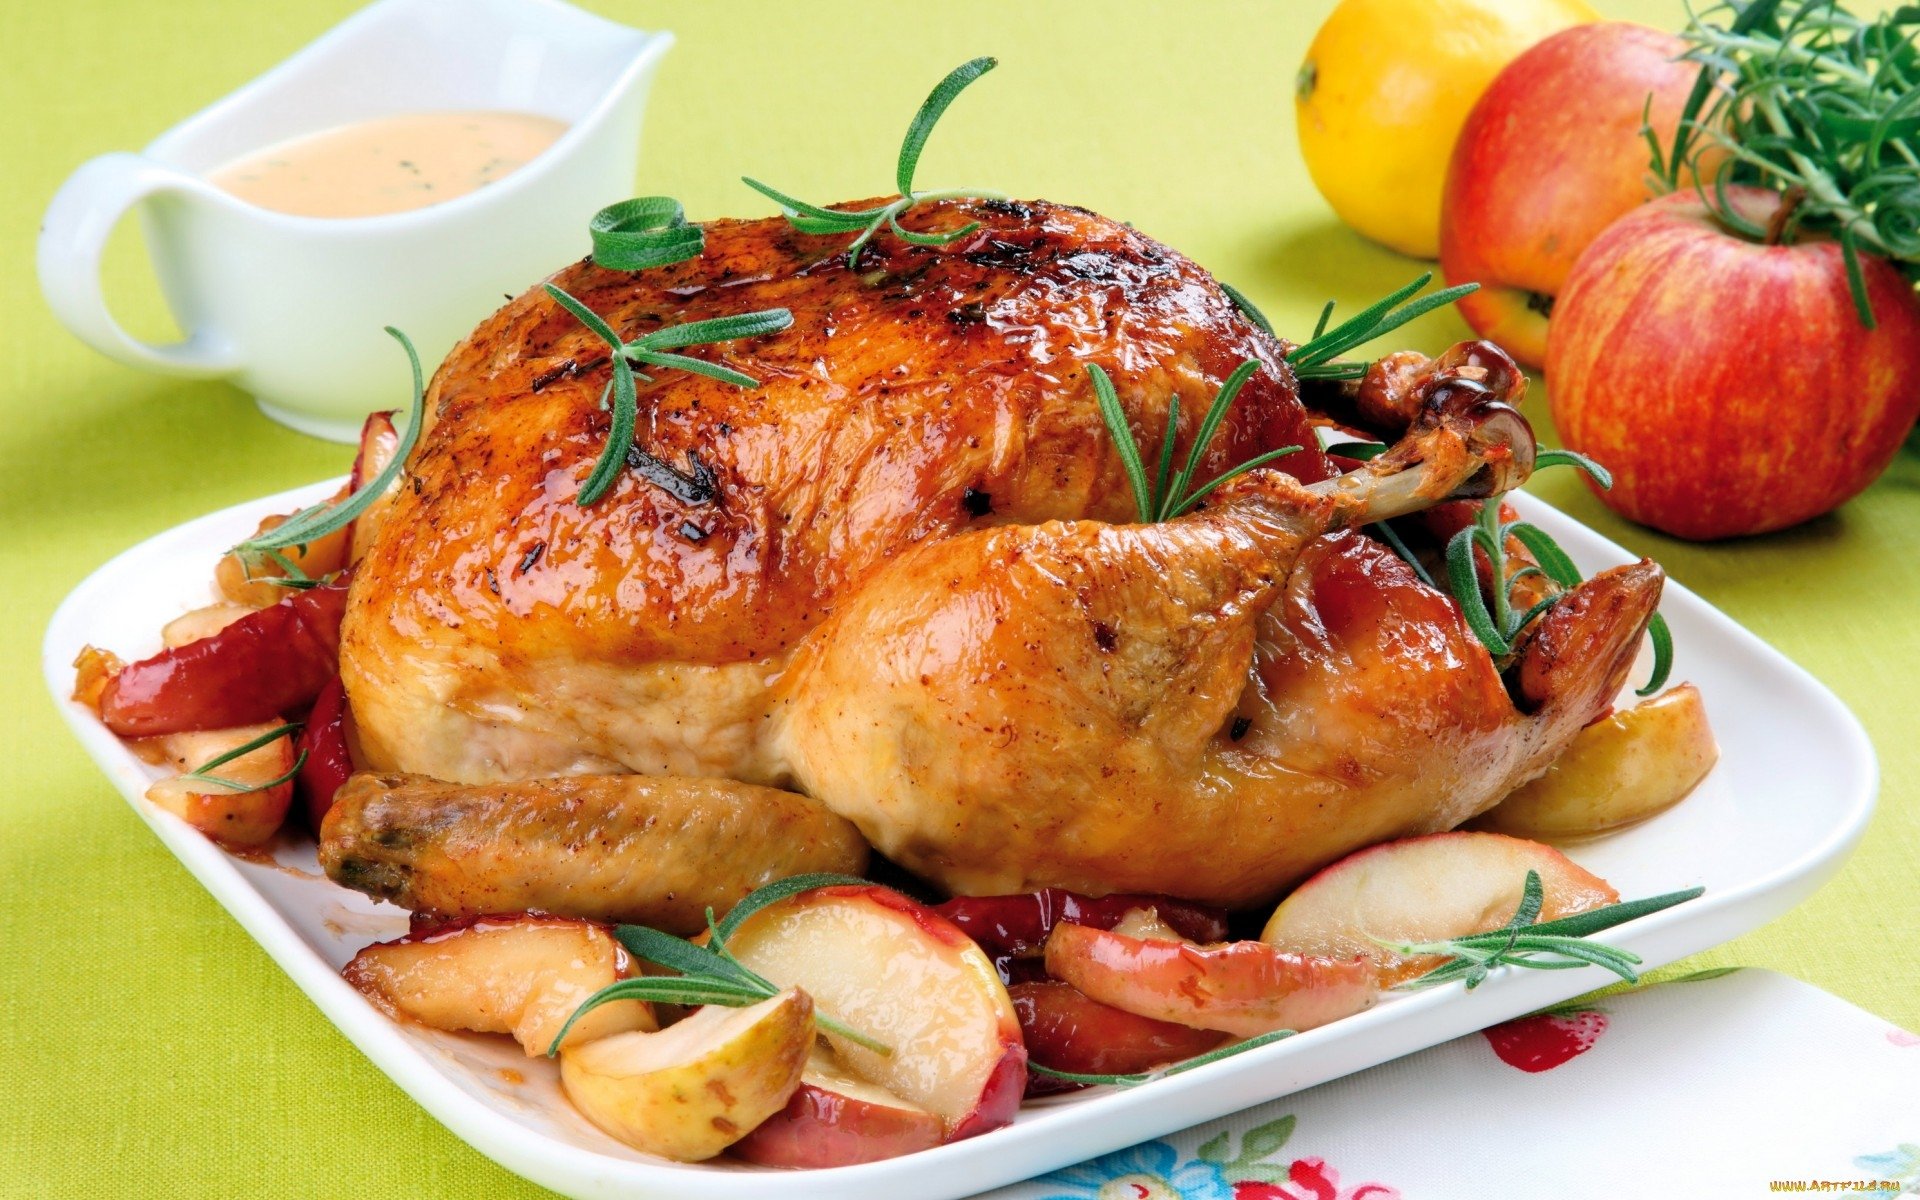 Chicken Image - ID: 288755 - Image Abyss